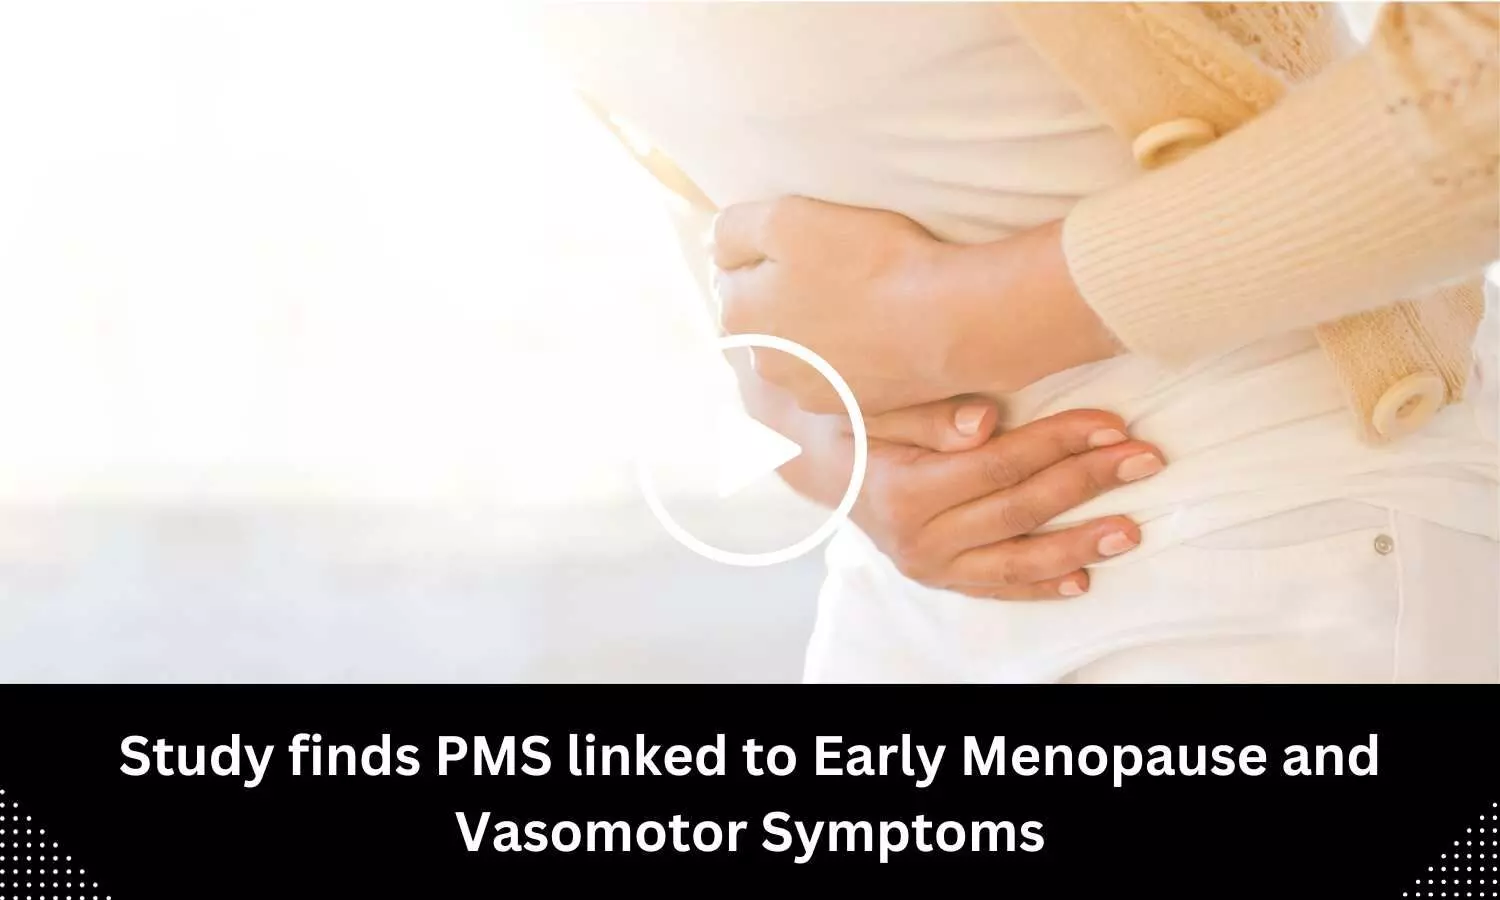 PMS linked to early menopause and vasomotor symptoms, finds study